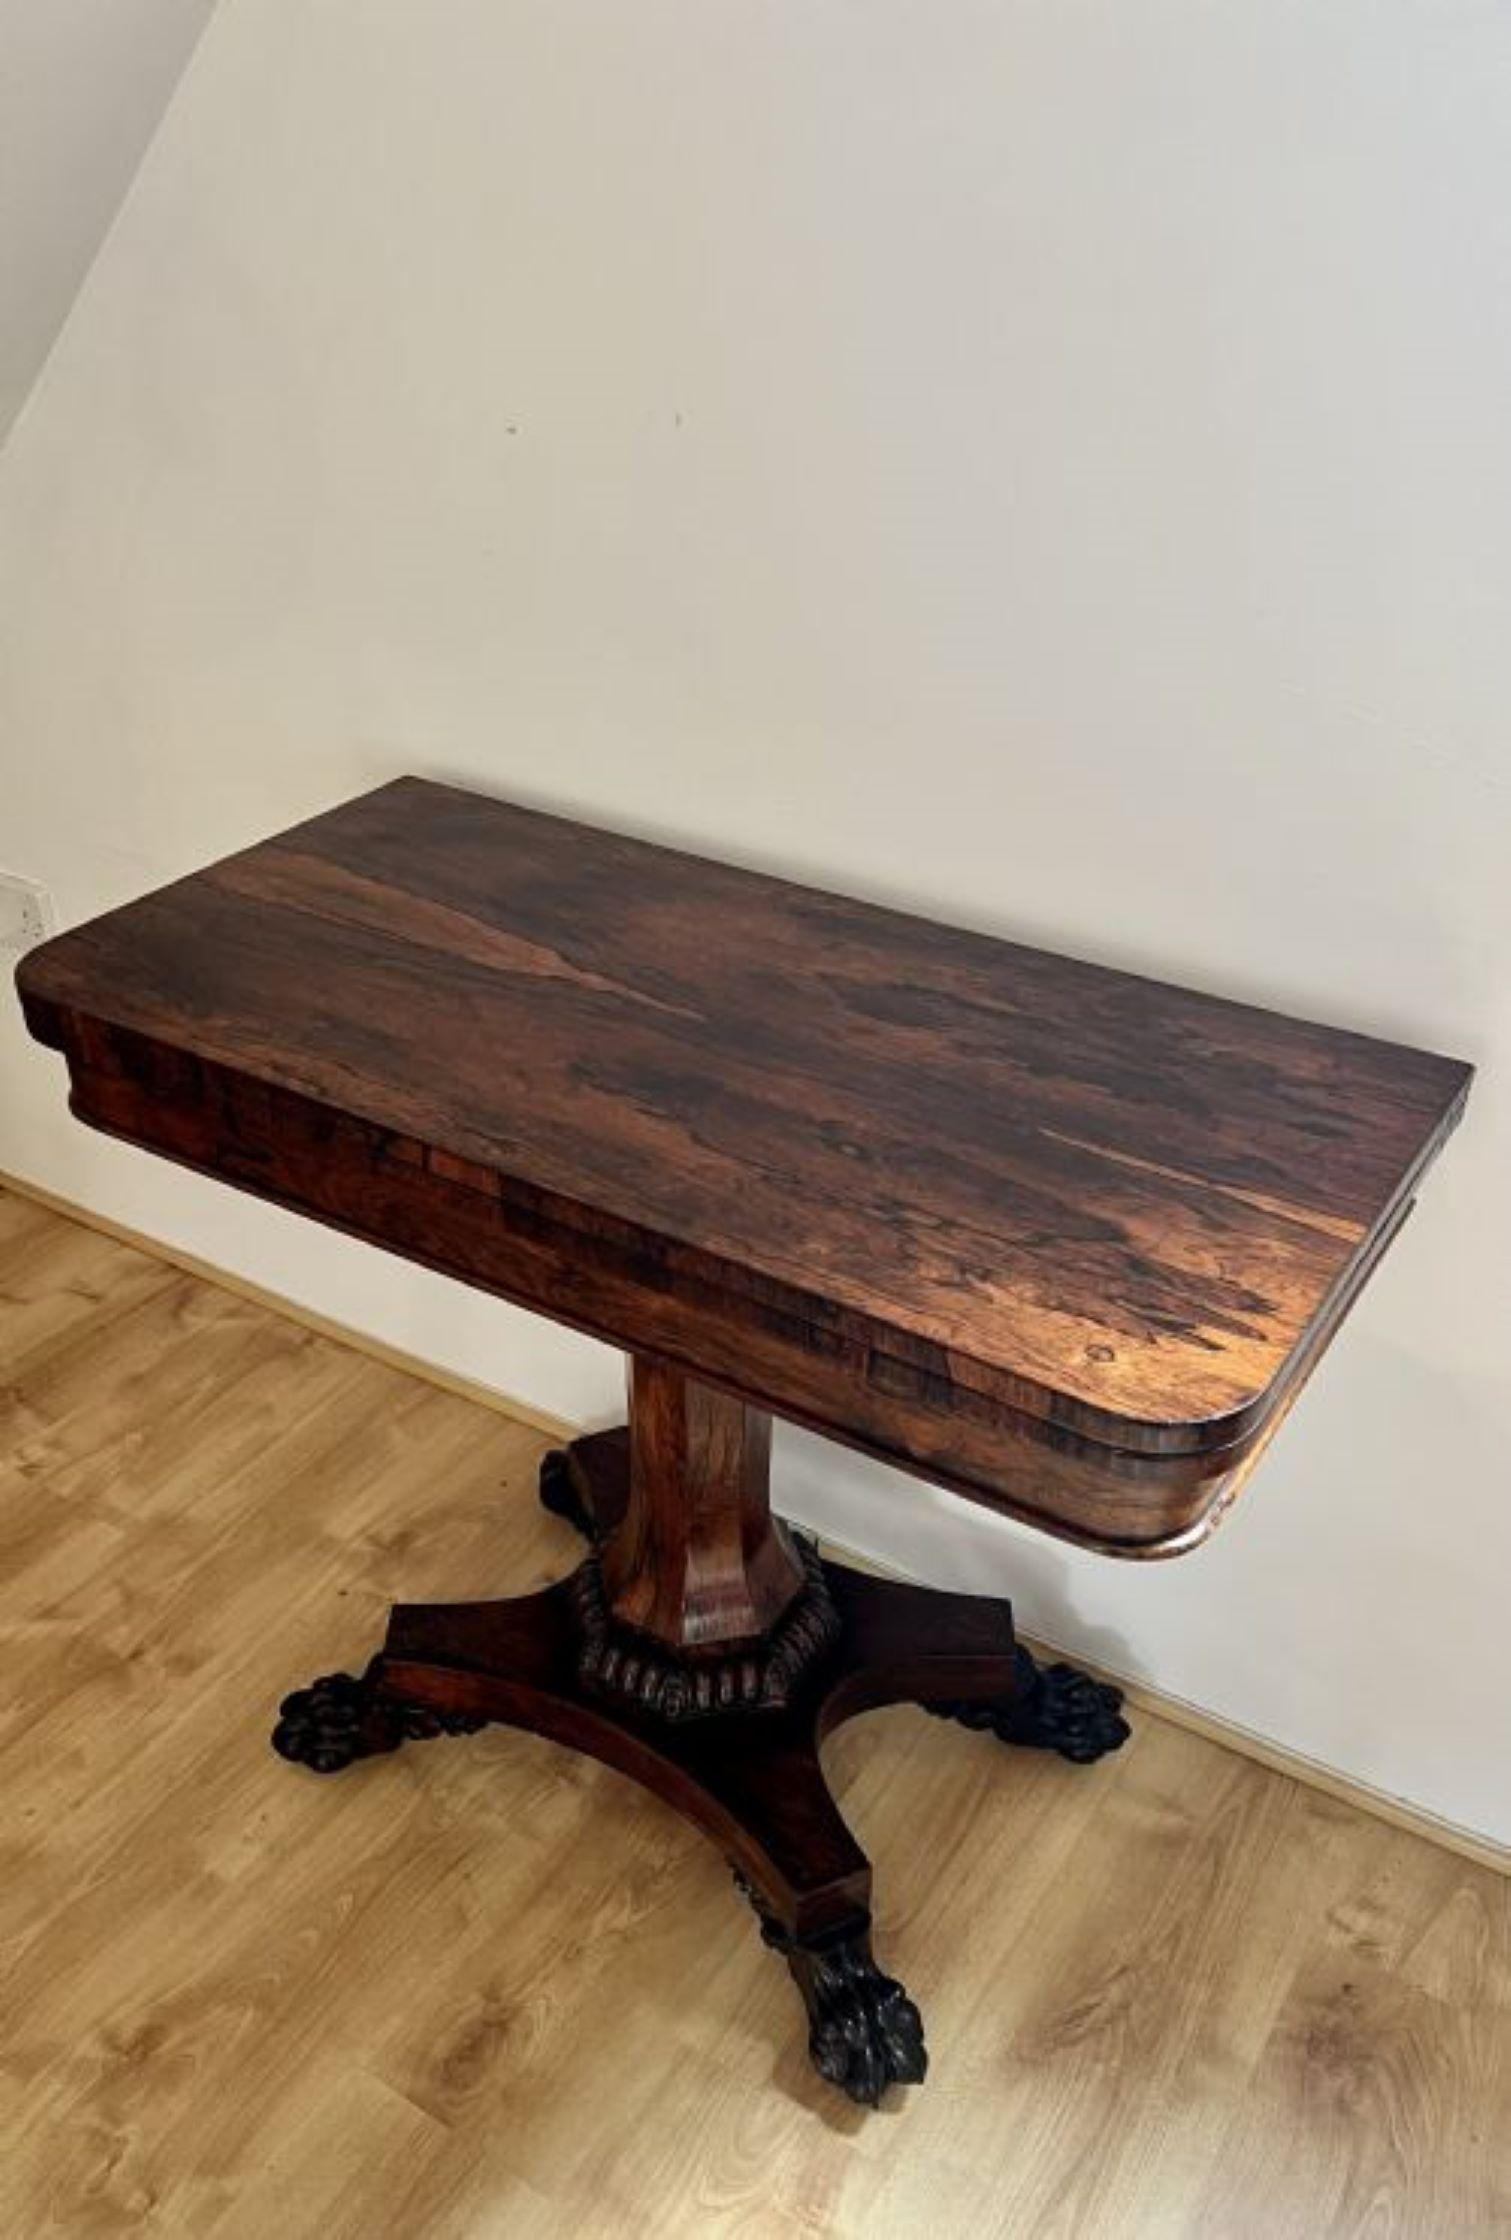 Fantastic quality Antique William IV rosewood card table with a fine quality figured rosewood top that lifts up and smiles to reveal a green baize interior, super carved frieze supported by a lovely shaped figured rosewood pedestal and finishing on